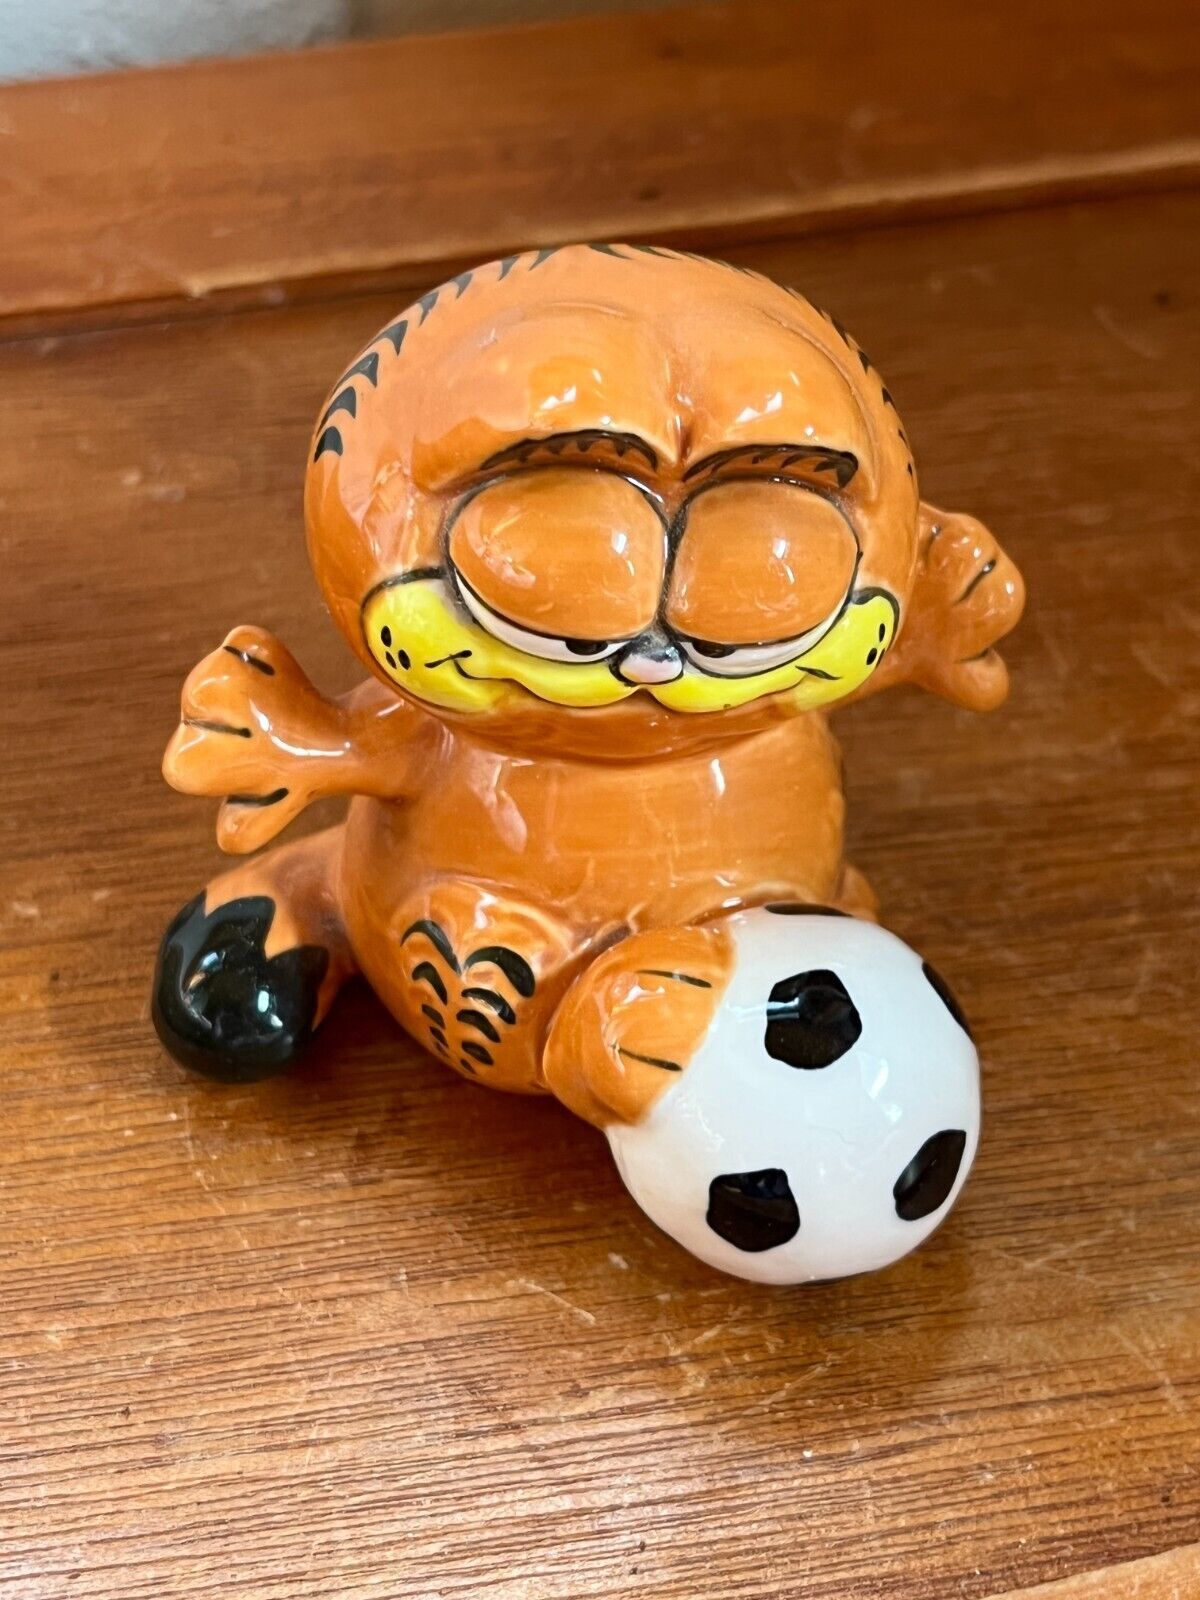 Primary image for Orange GARFIELD the Cat Kicking Soccer Ball Ceramic Figurine – 2.5 inches high x